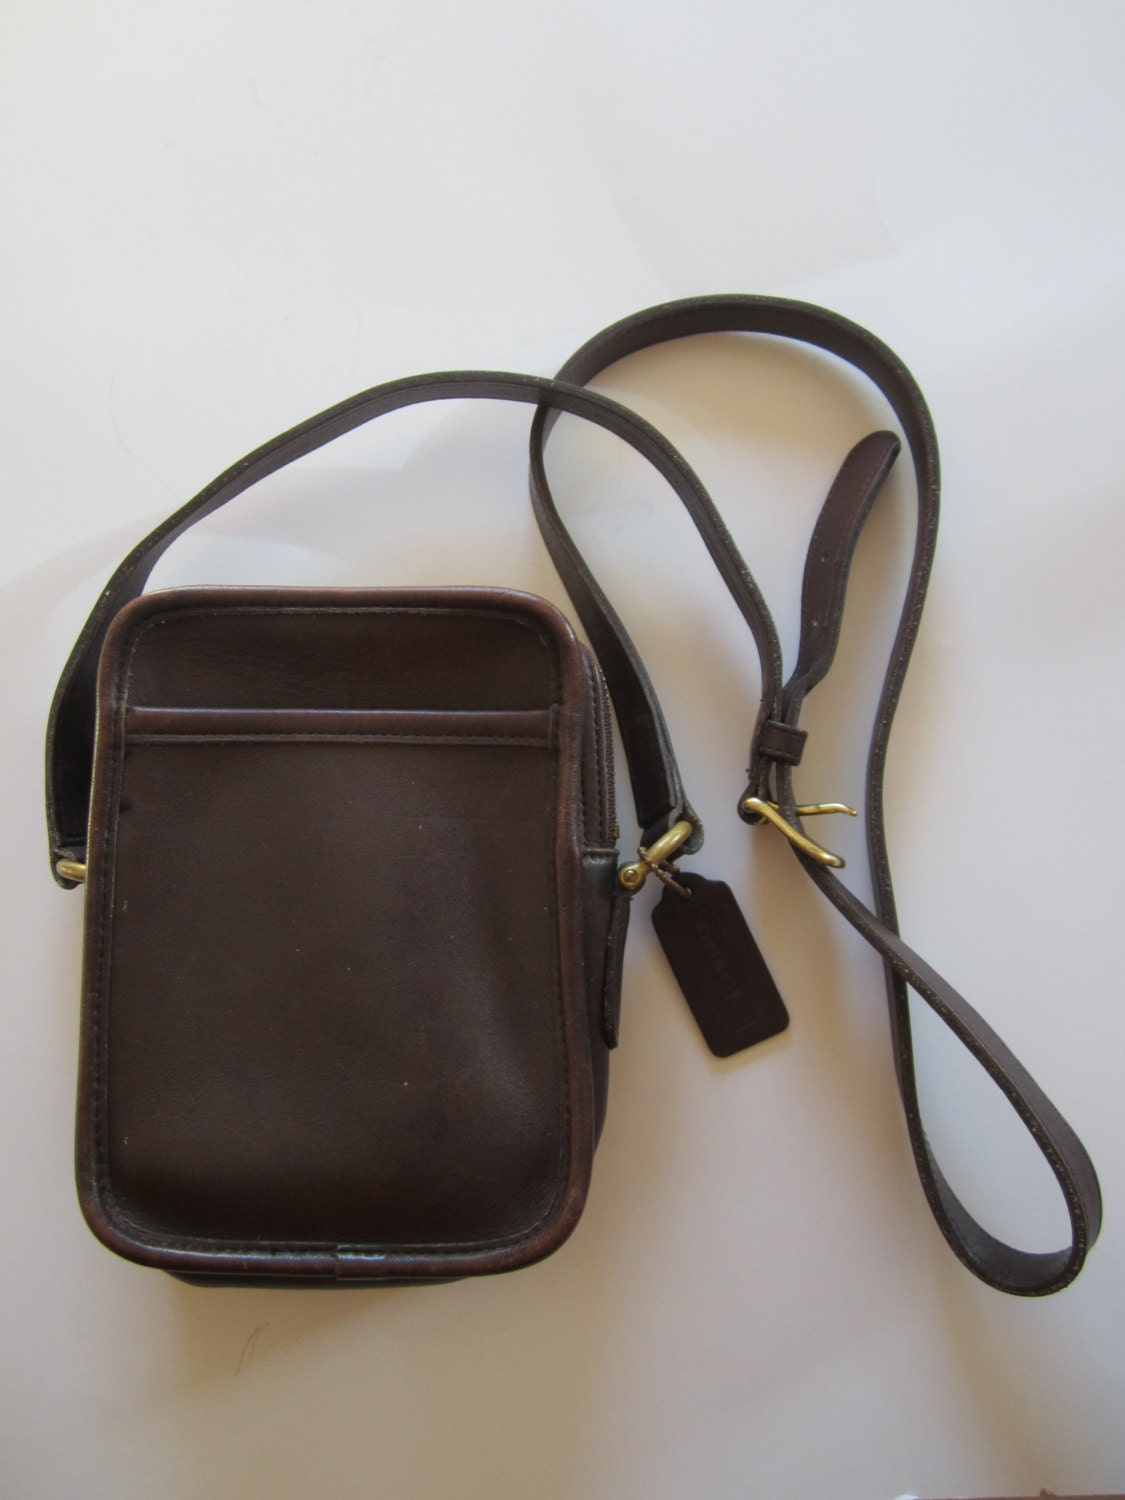 Vintage Coach Brown Leather Cross Body Bag Small Shoulder